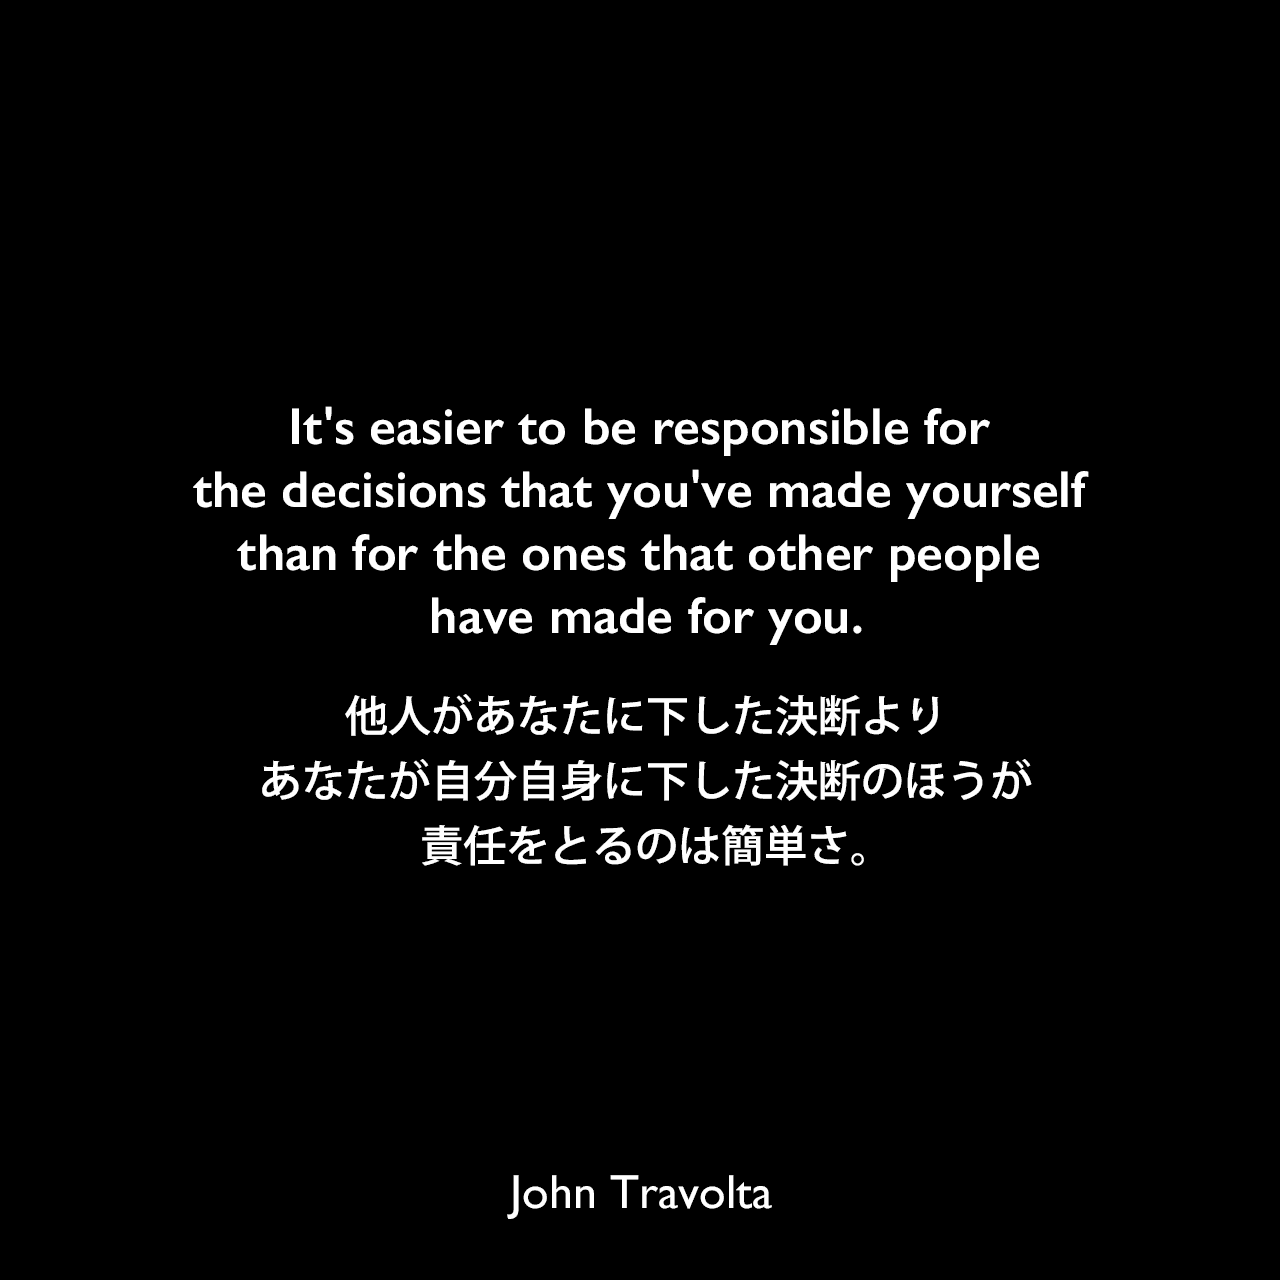 It's easier to be responsible for the decisions that you've made yourself than for the ones that other people have made for you.他人があなたに下した決断より、あなたが自分自身に下した決断のほうが責任をとるのは簡単さ。John Travolta